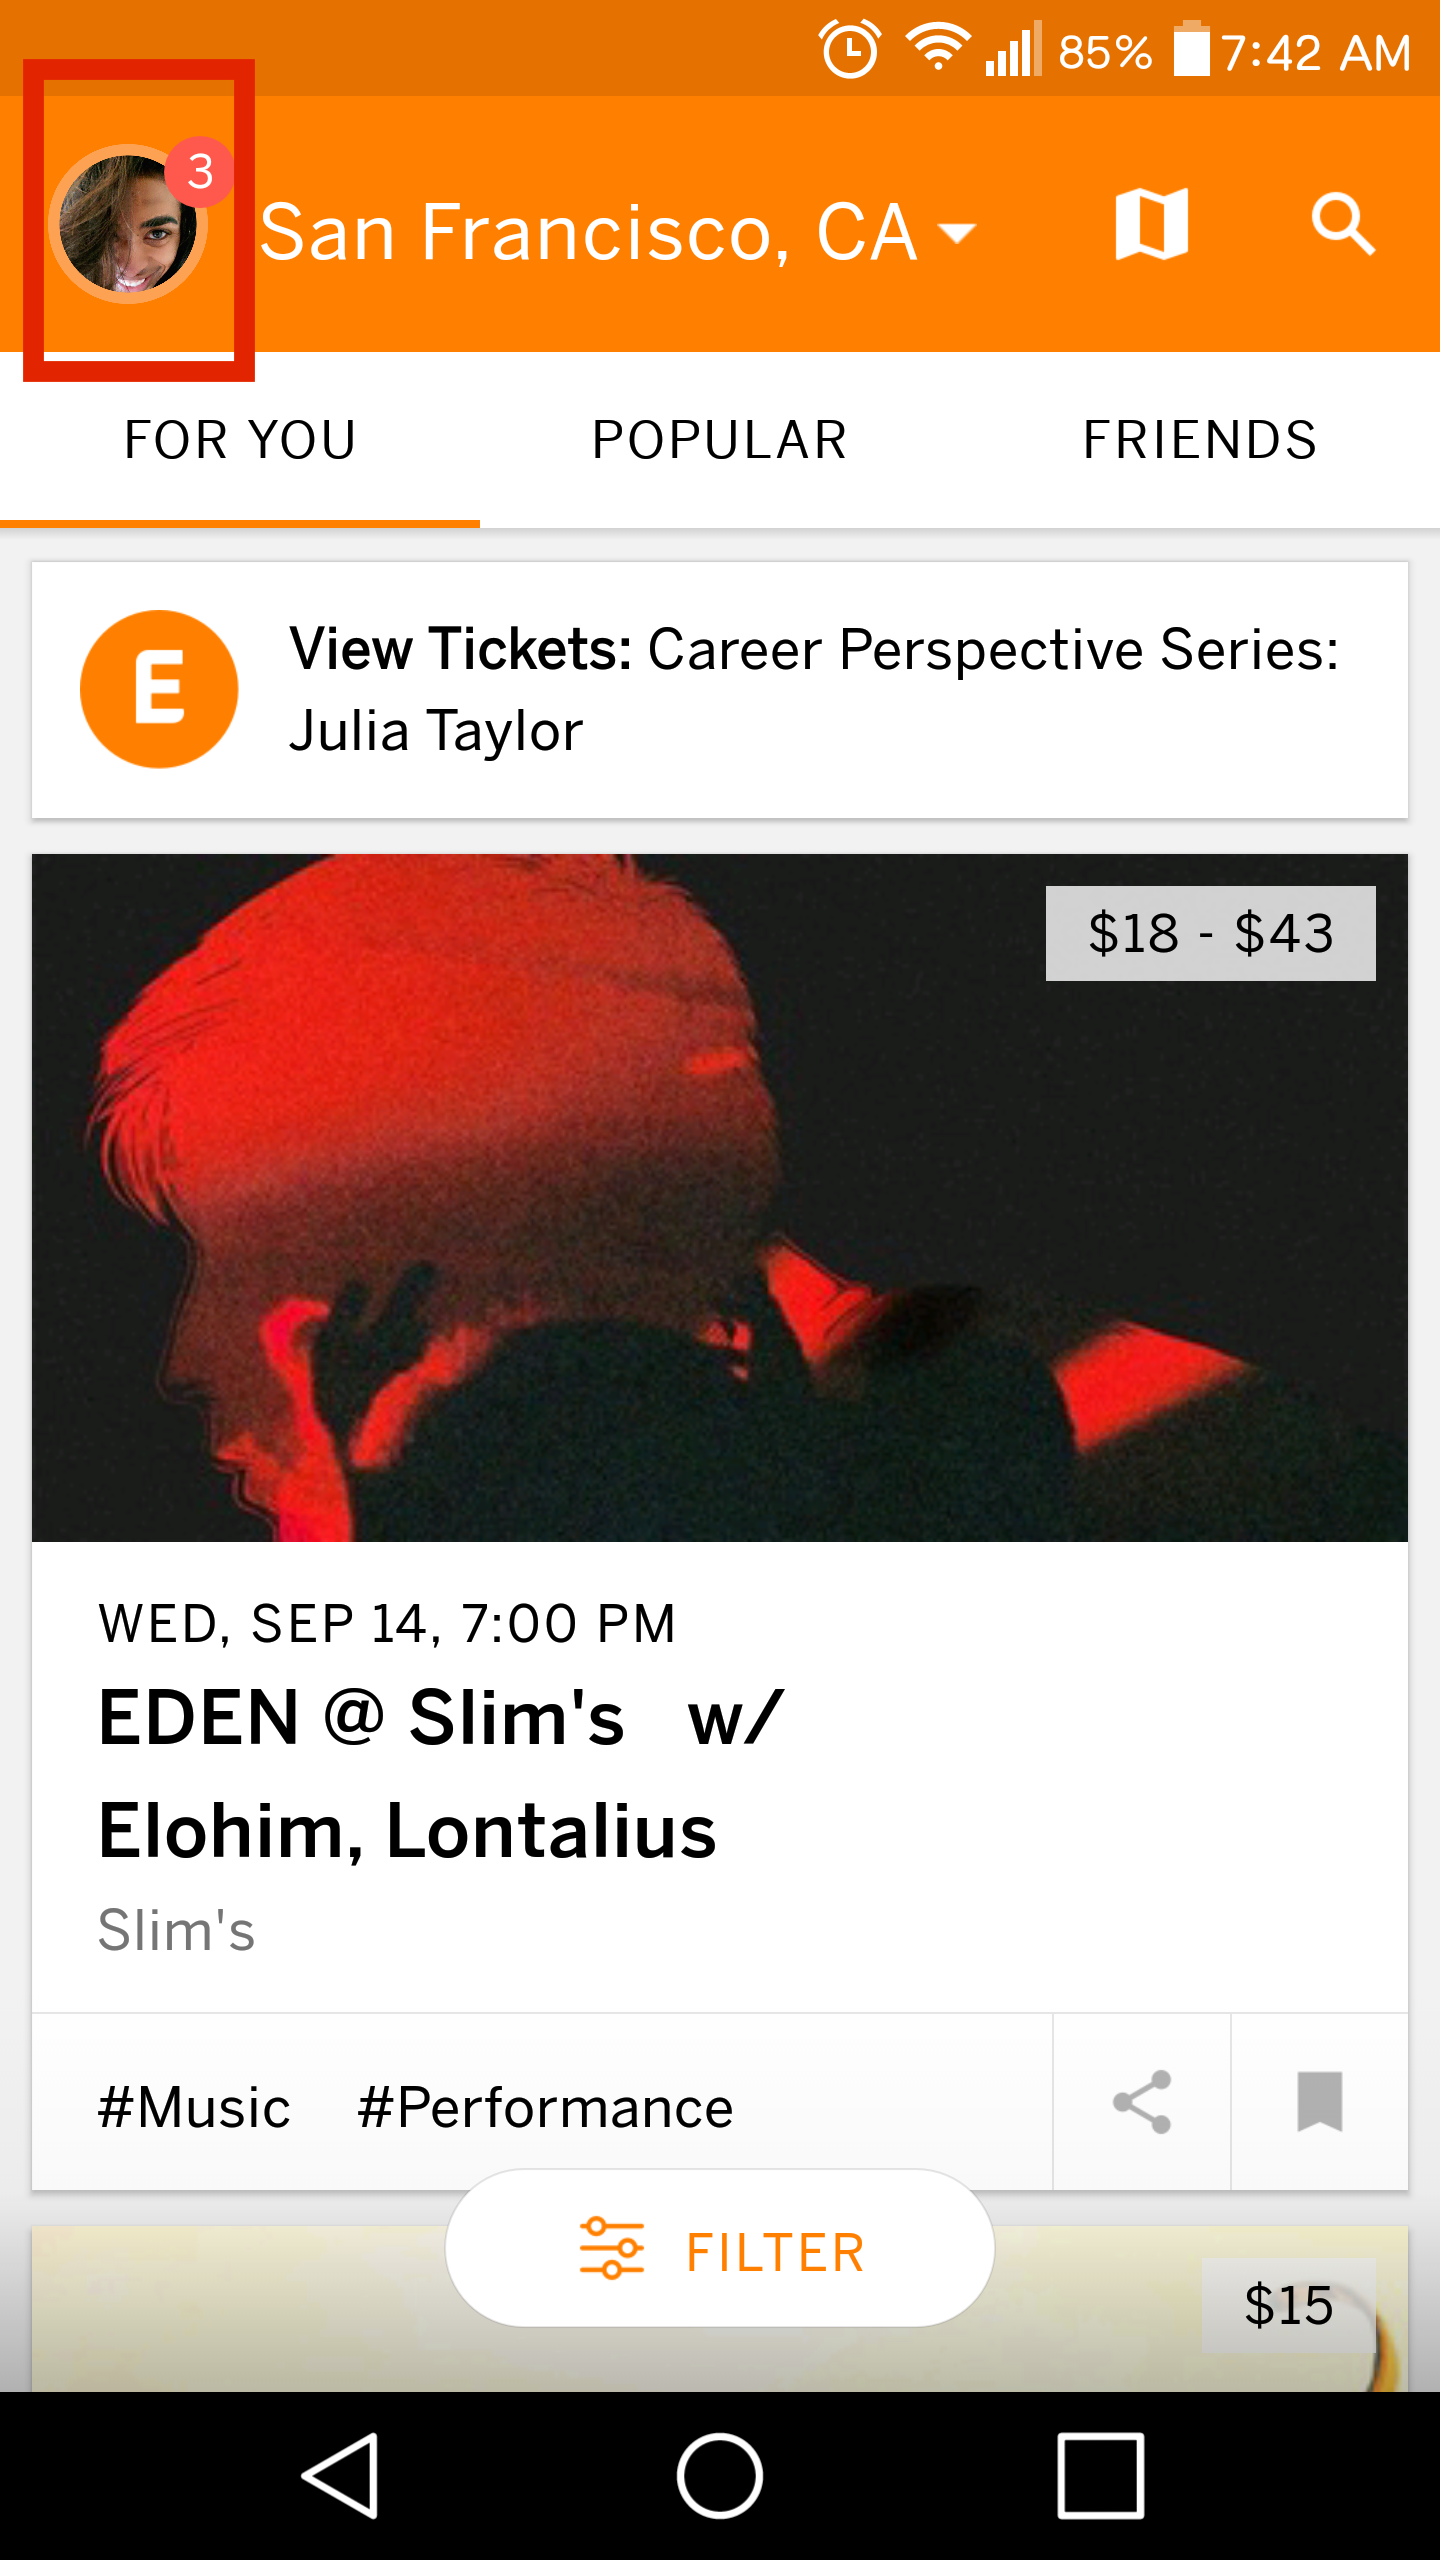 how do i get my tickets from eventbrite